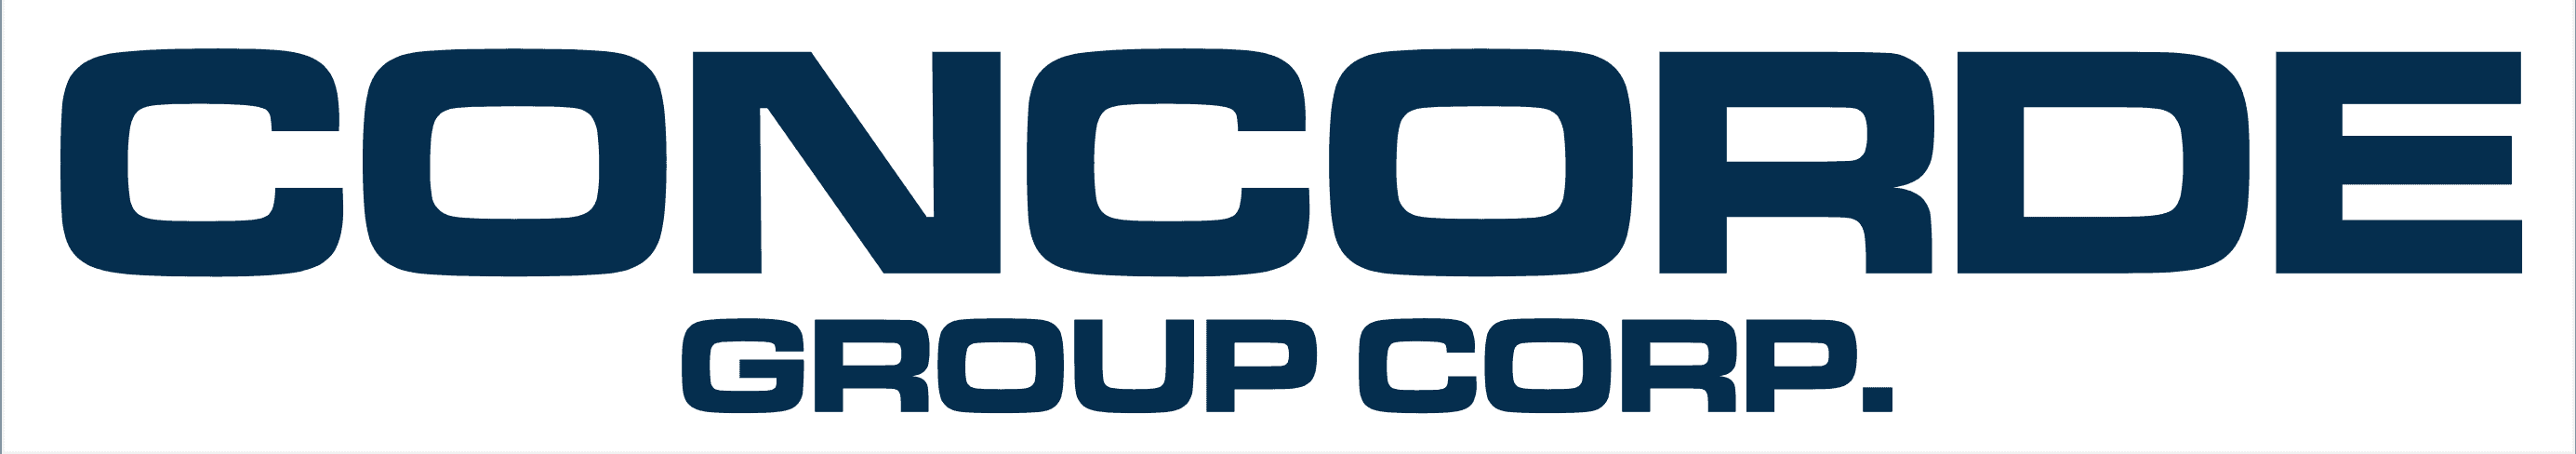 Concord Group Corp.